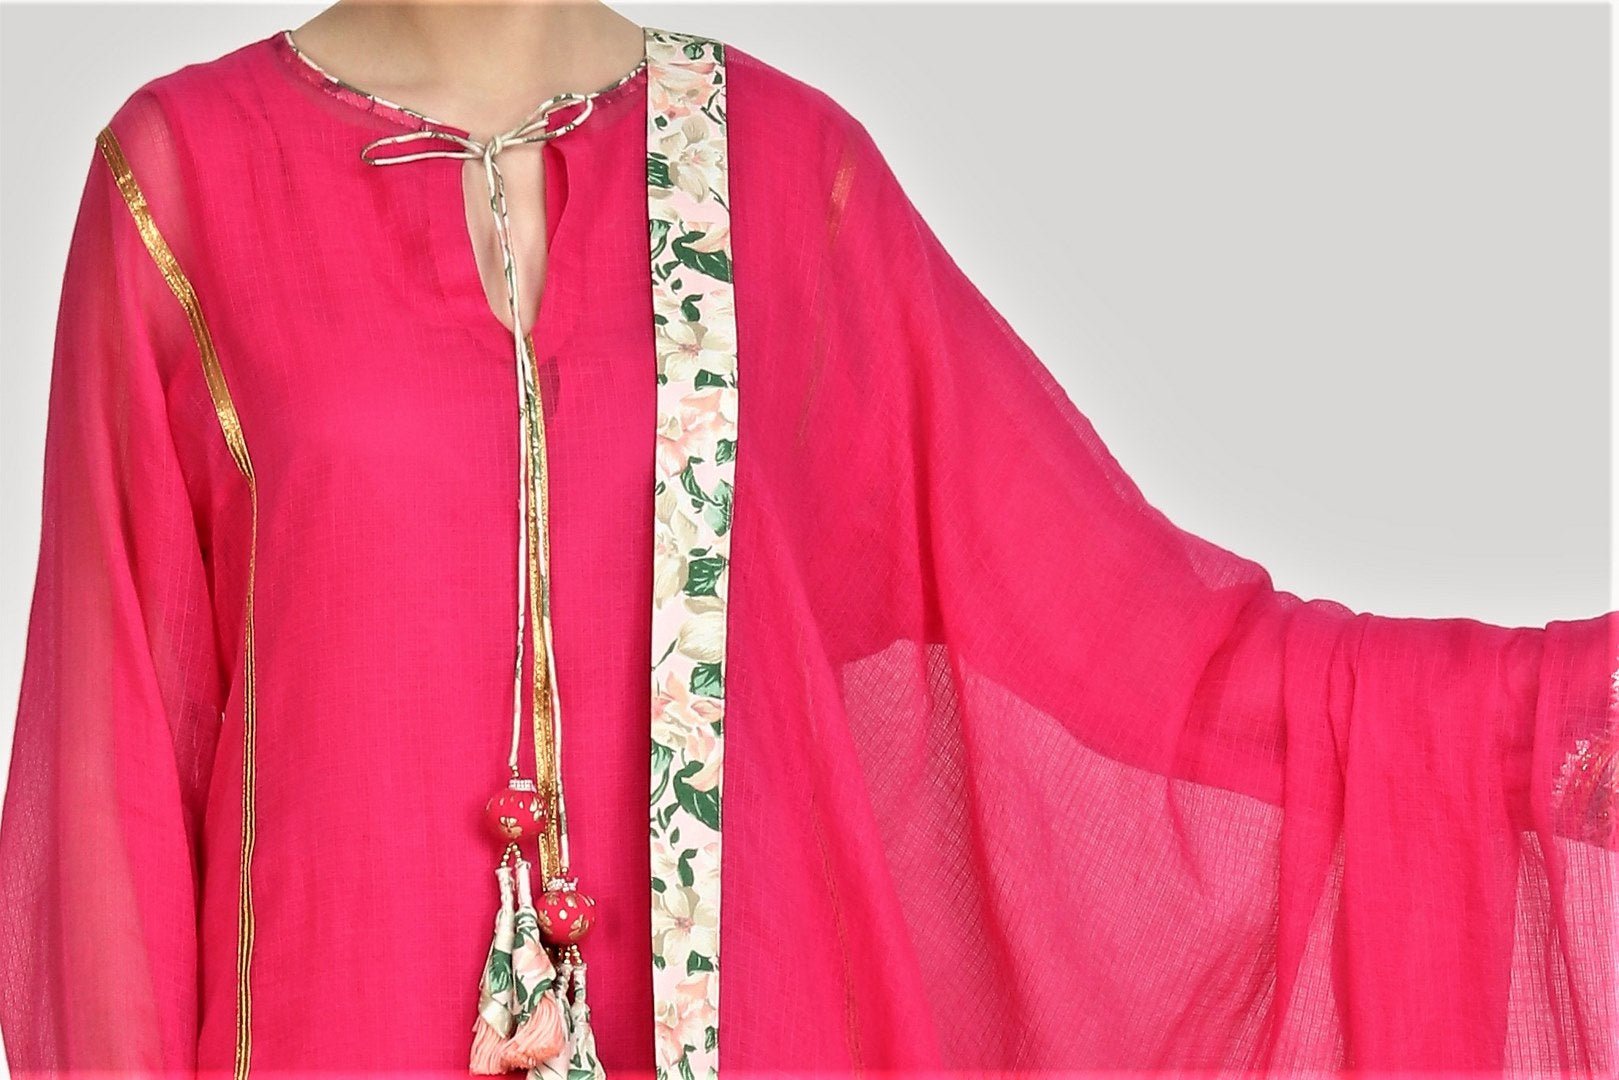 Buy hot pink kota doria kurta with sharara online in USA and dupatta. For more such gorgeous designer dresses, shop at Pure Elegance Indian fashion store in USA. A beautiful range of traditional Indian sarees and designer clothing is available for Indian women living in USA. You can also shop at our online store.-kurta